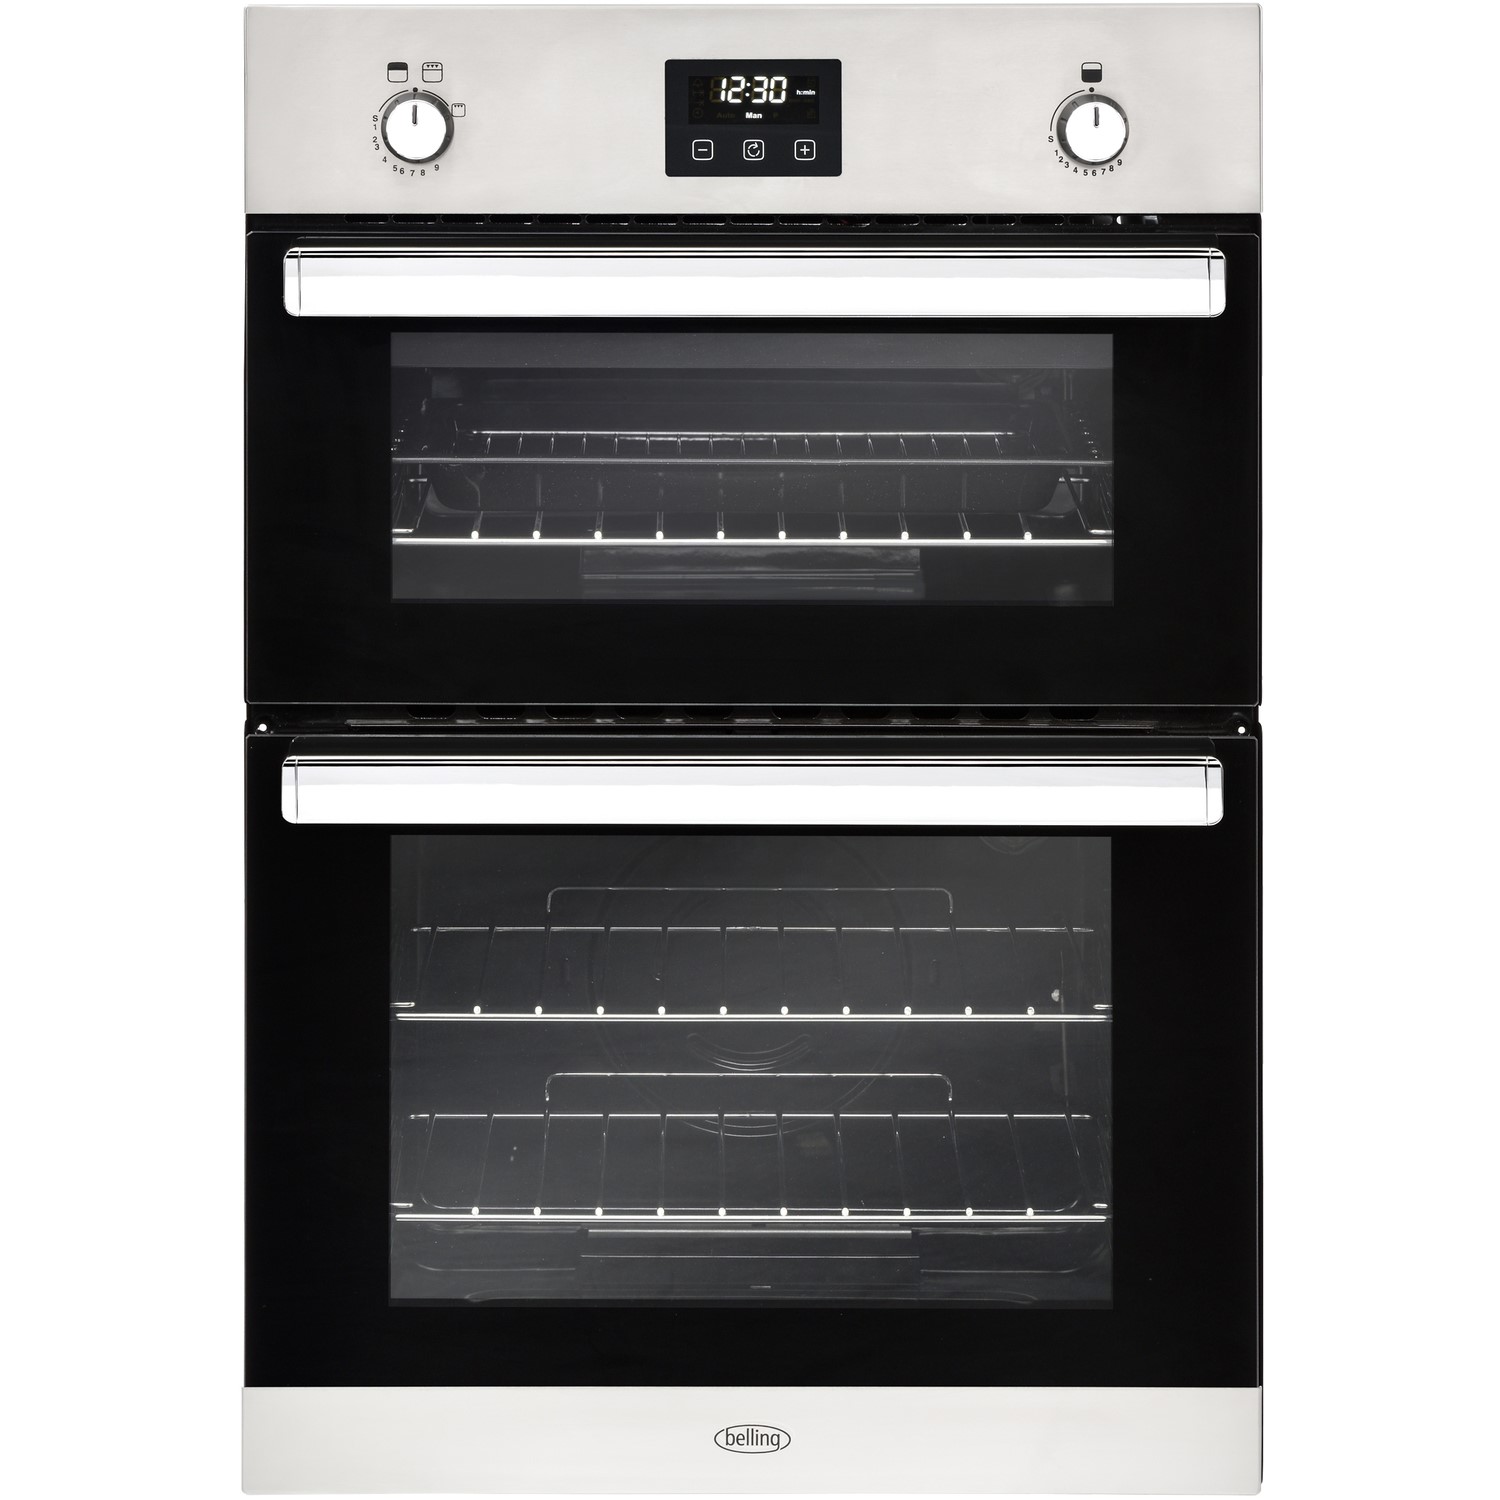 Belling BI902G Built In Gas Double Oven - Stainless Steel